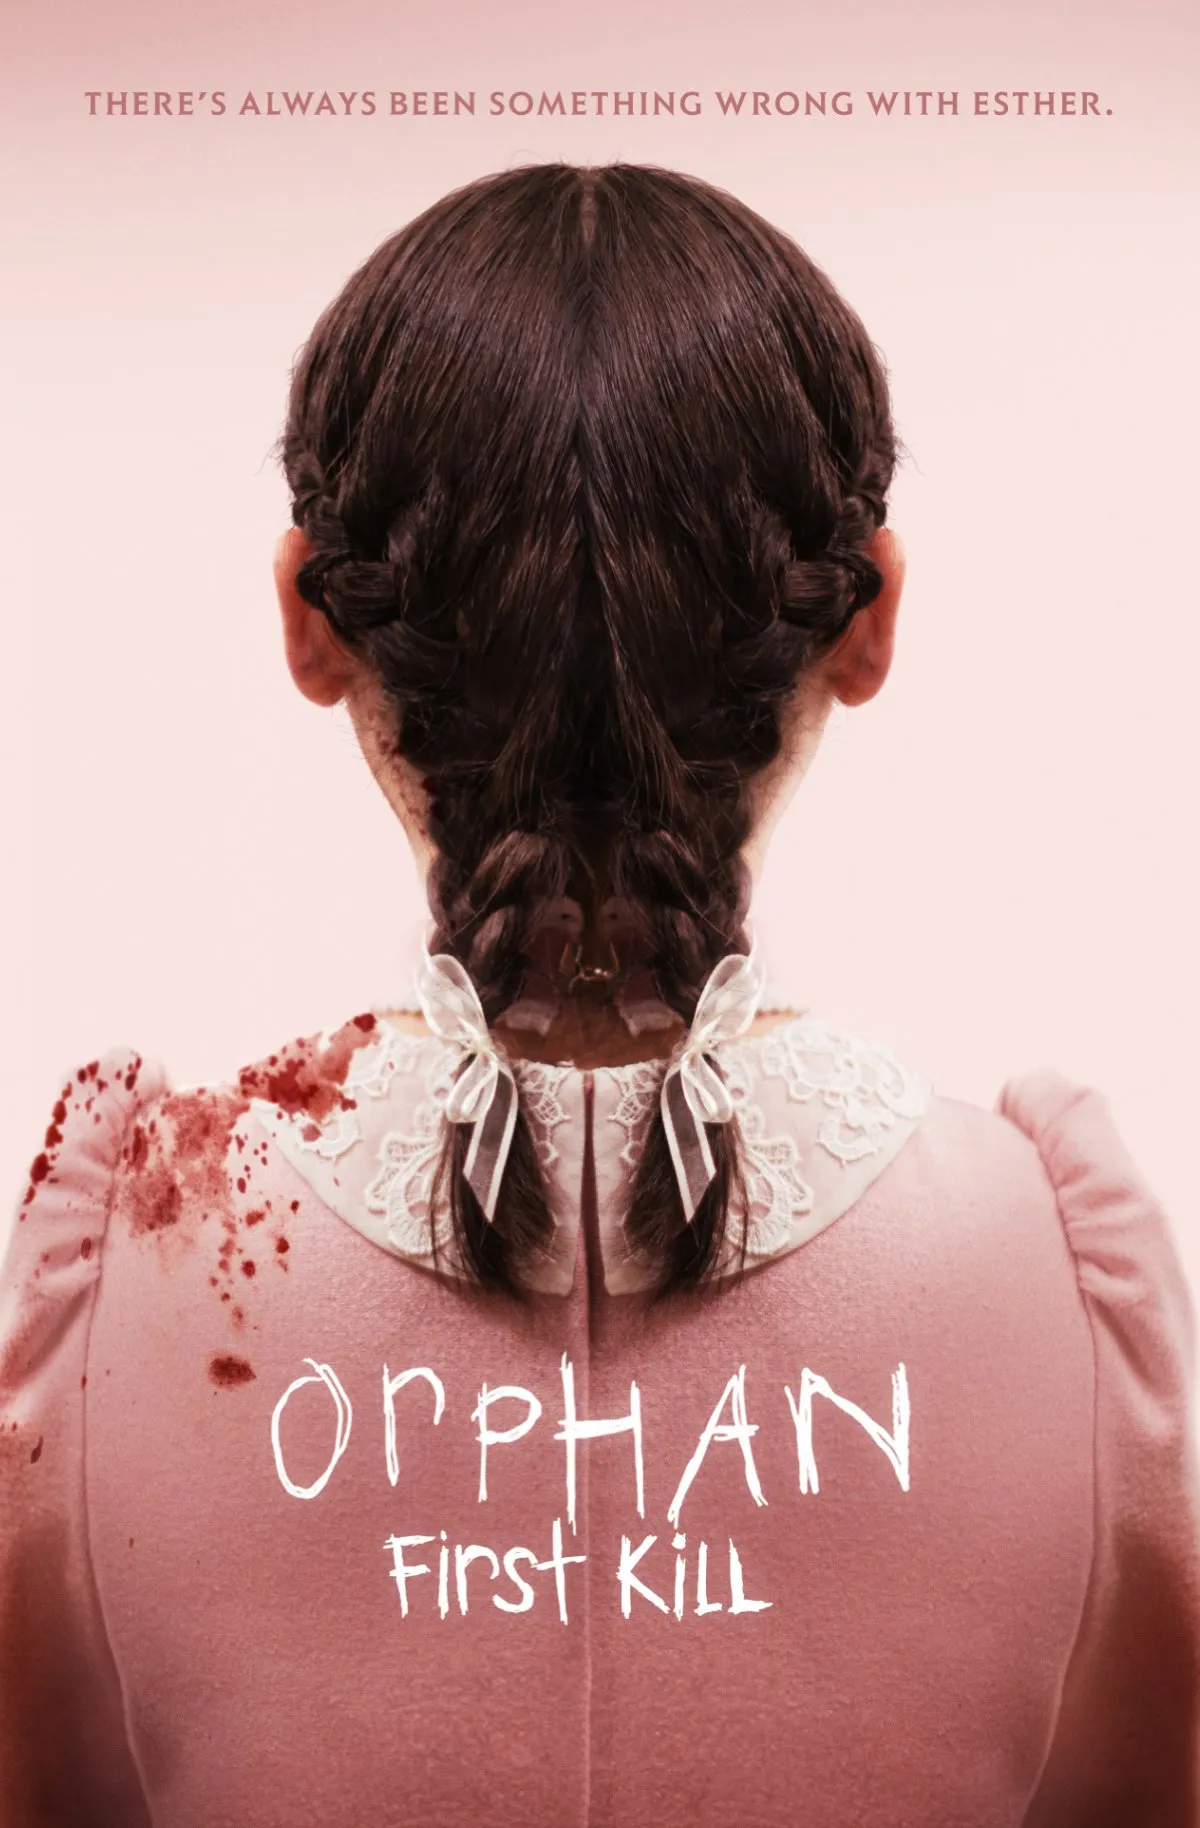 The Orphan: First Kill